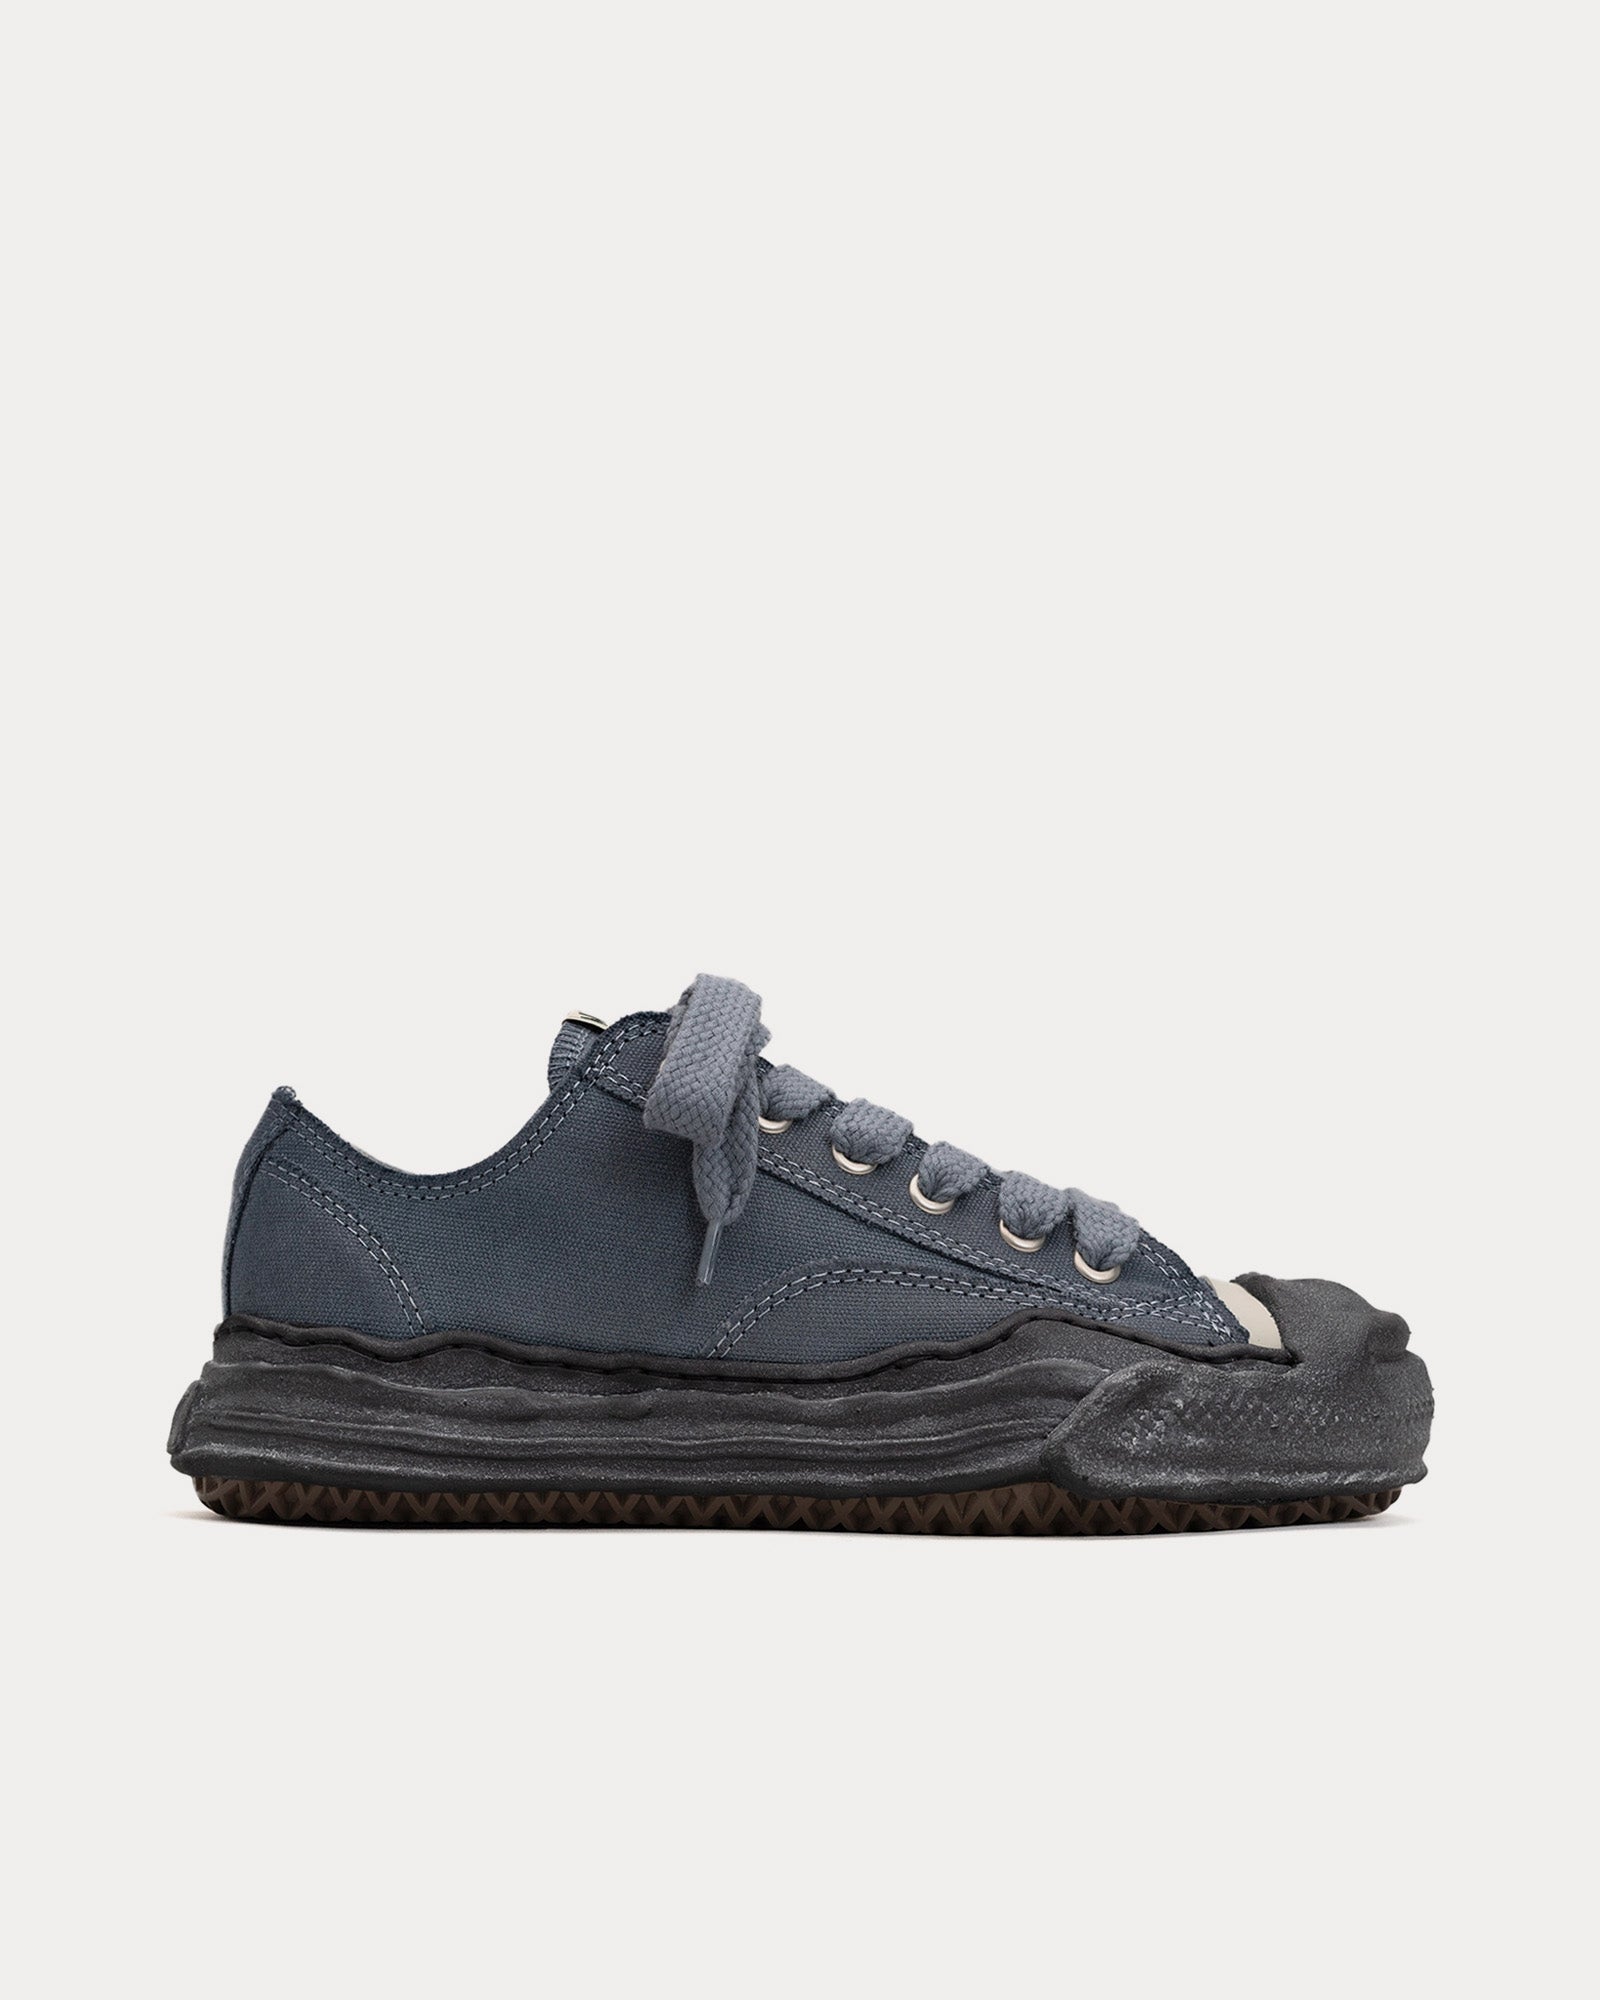 Mihara Yasuhiro - Hank OG Sole Over-Dyed Canvas Black / Black Low Top Sneakers